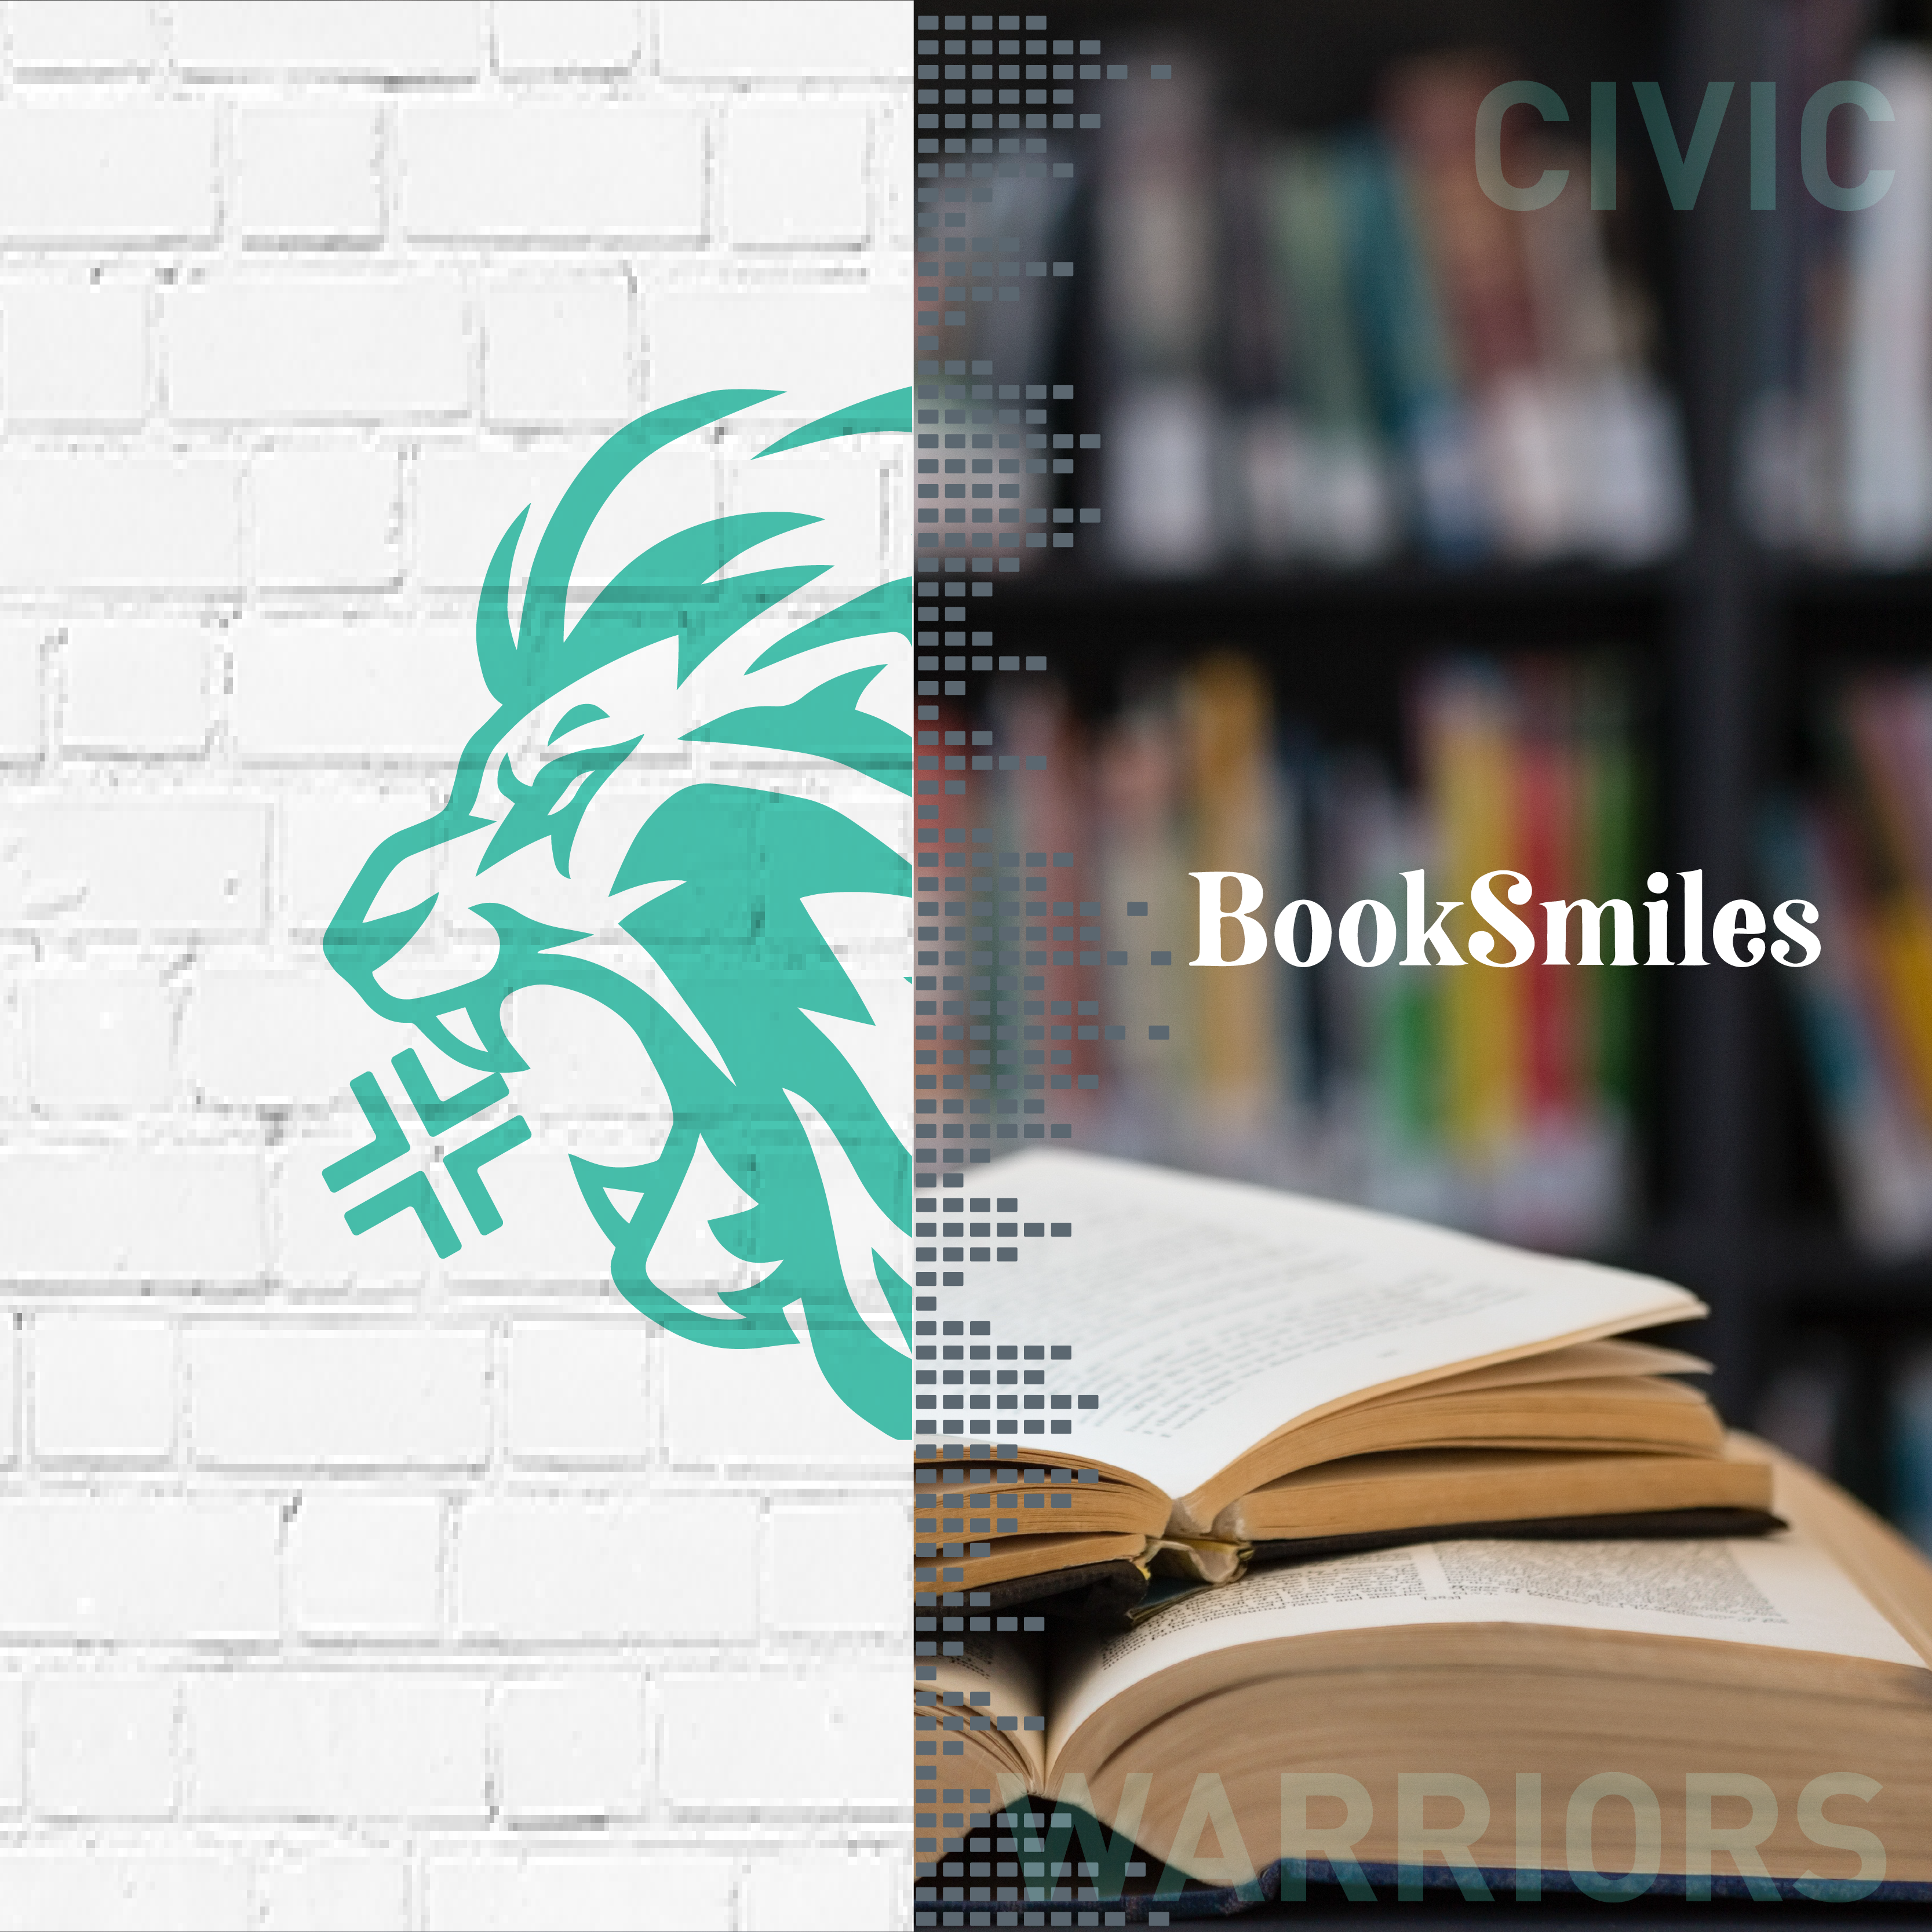 civic warriors podcast guest, larry abrams of booksmiles